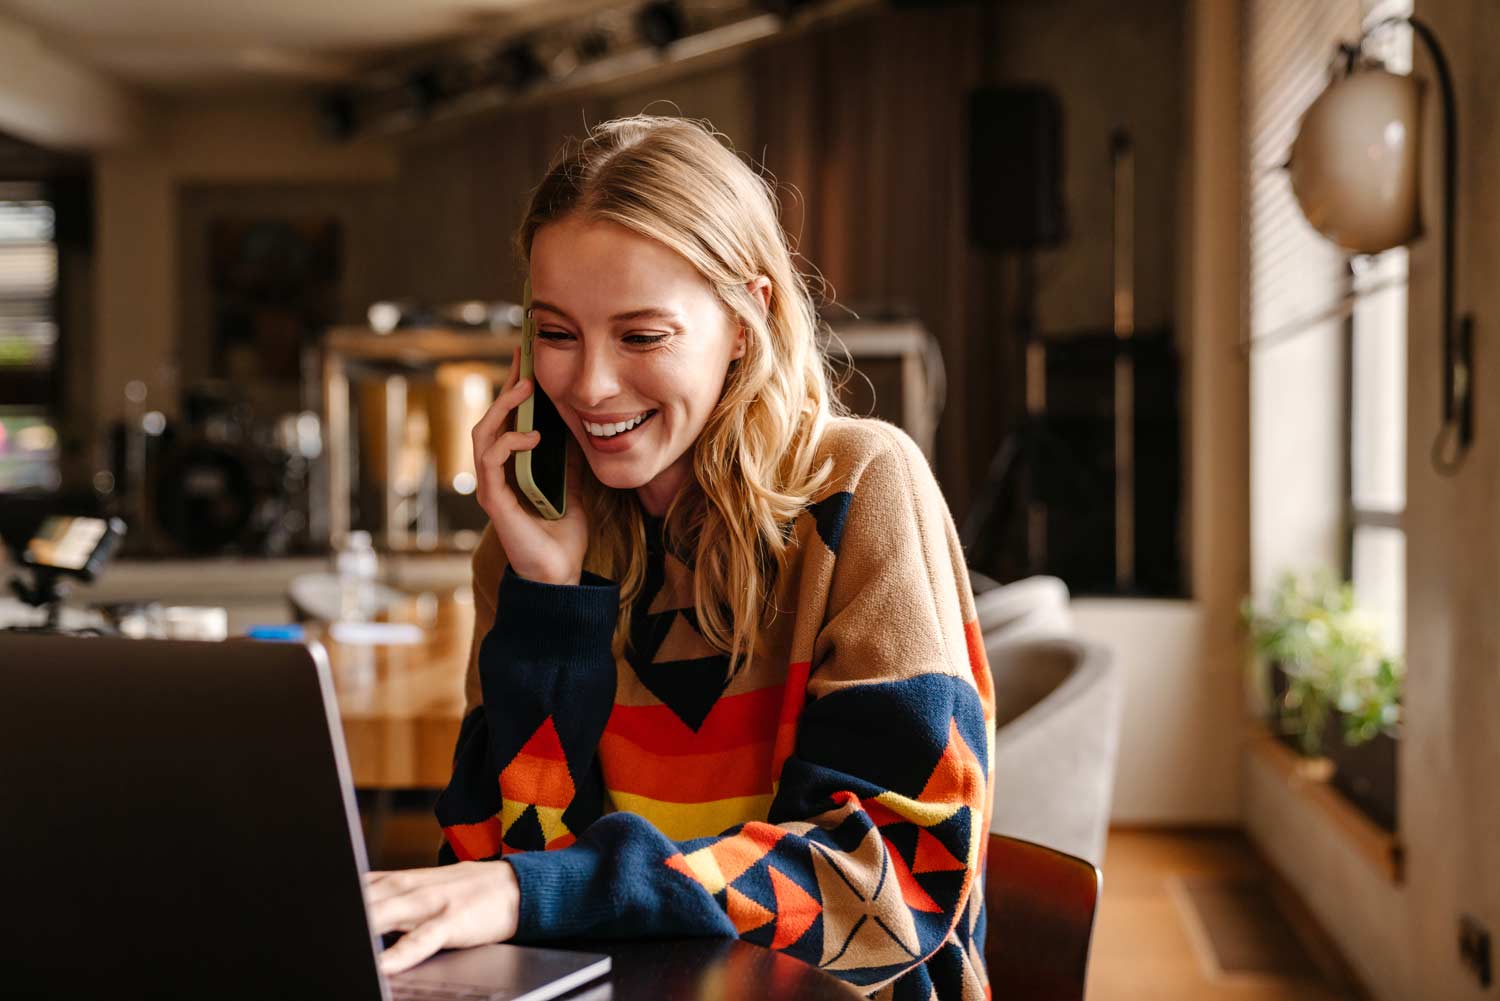 A smiling woman in a colorful sweater talks on the phone while using a laptop in a cozy, modern room